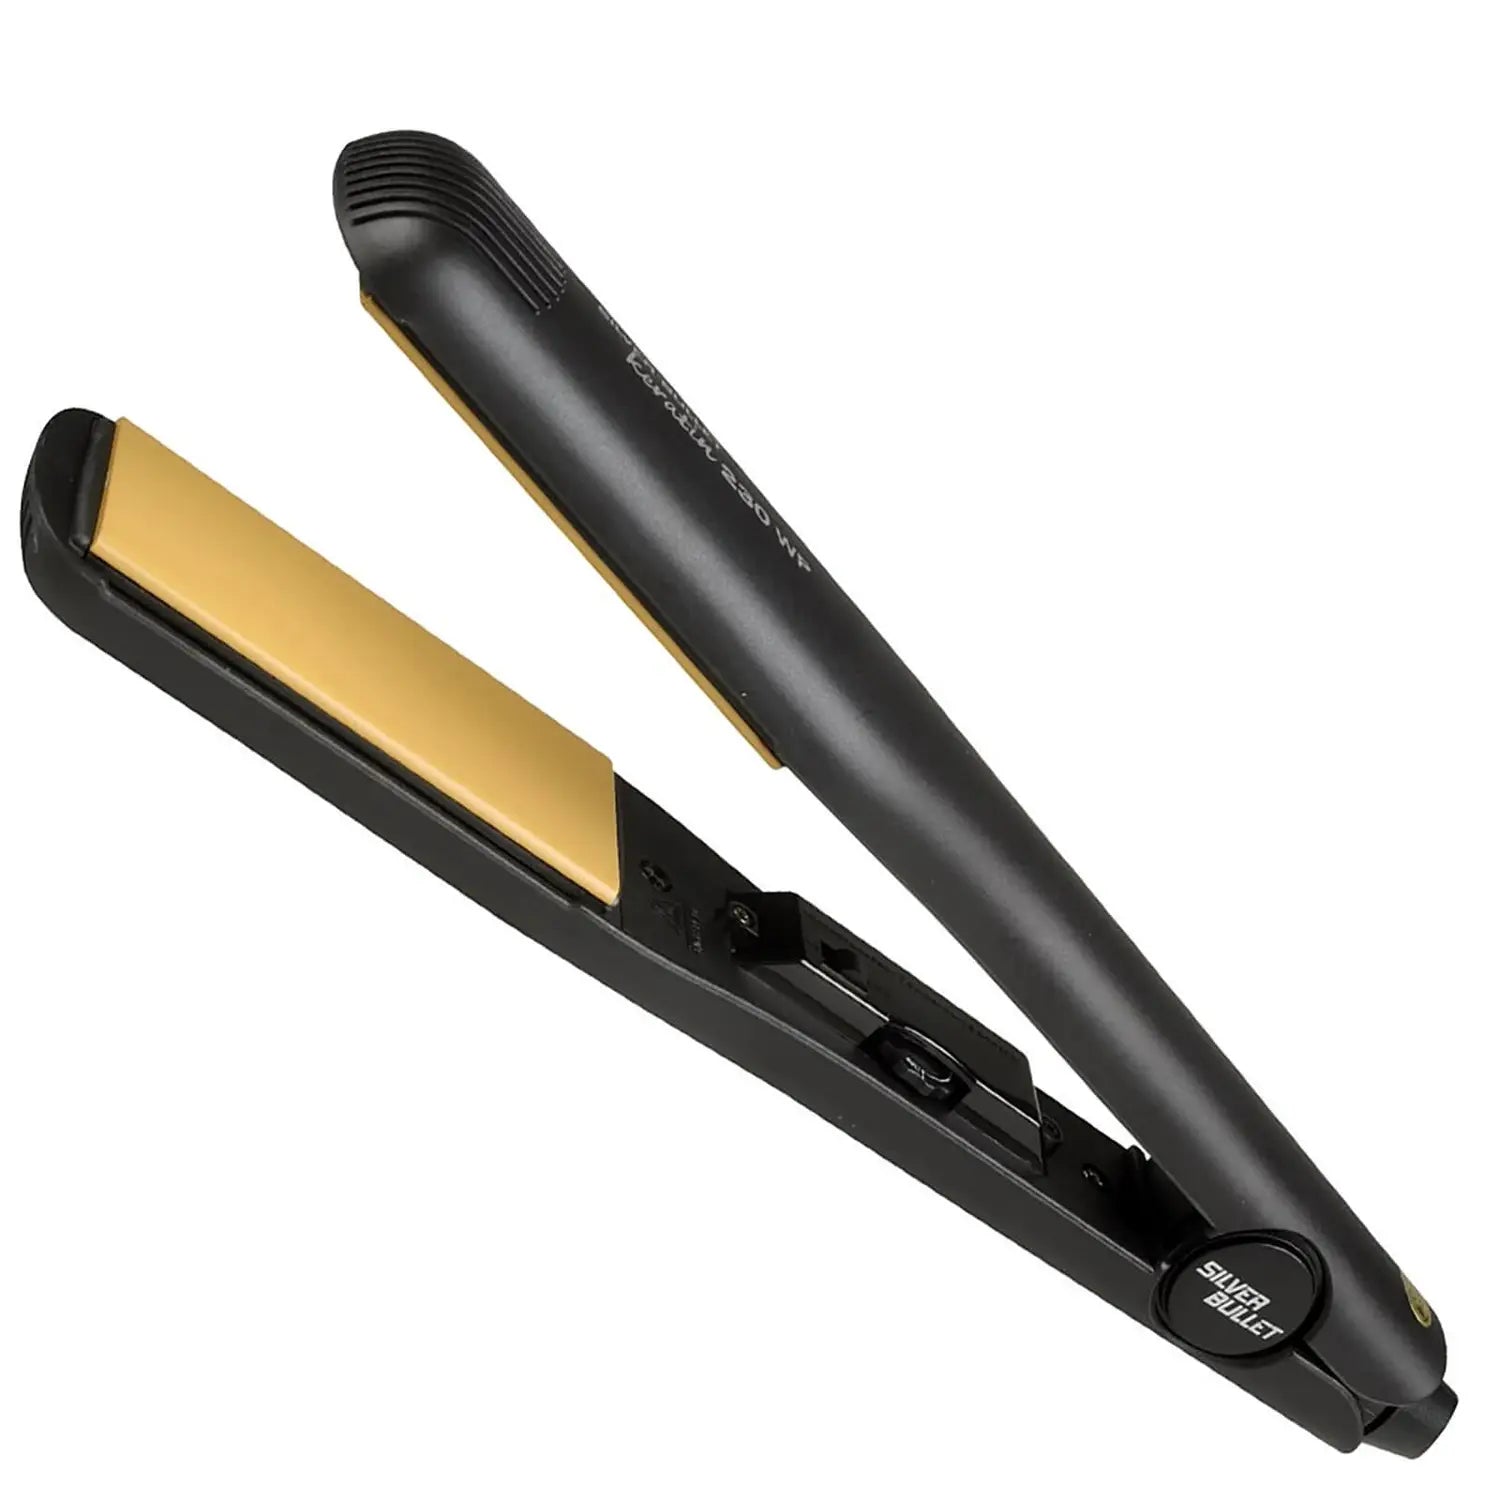 Silver Bullet Keratin 230 Ceramic Wide Plate Straighteners - Kess Hair and Beauty